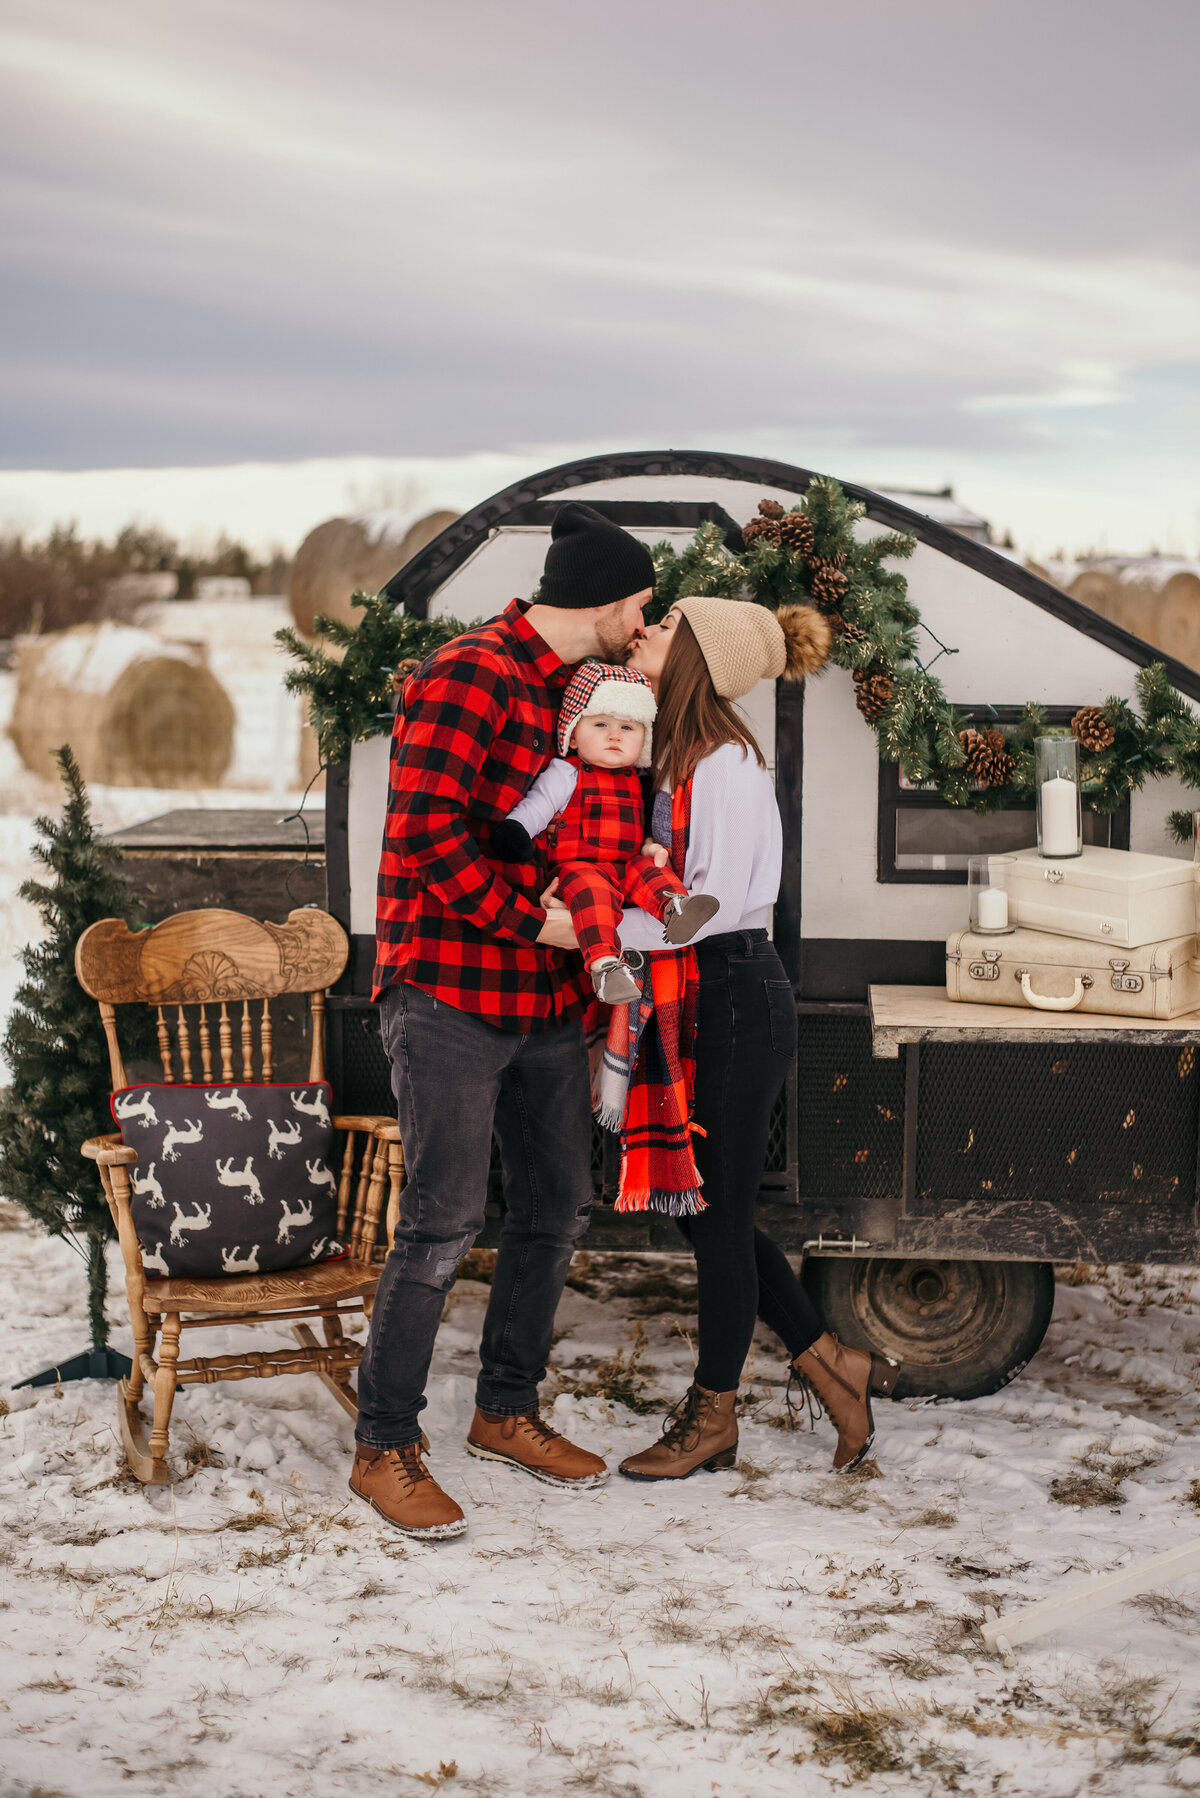 Man and woman kiss with infant in arms with a Christmas set up